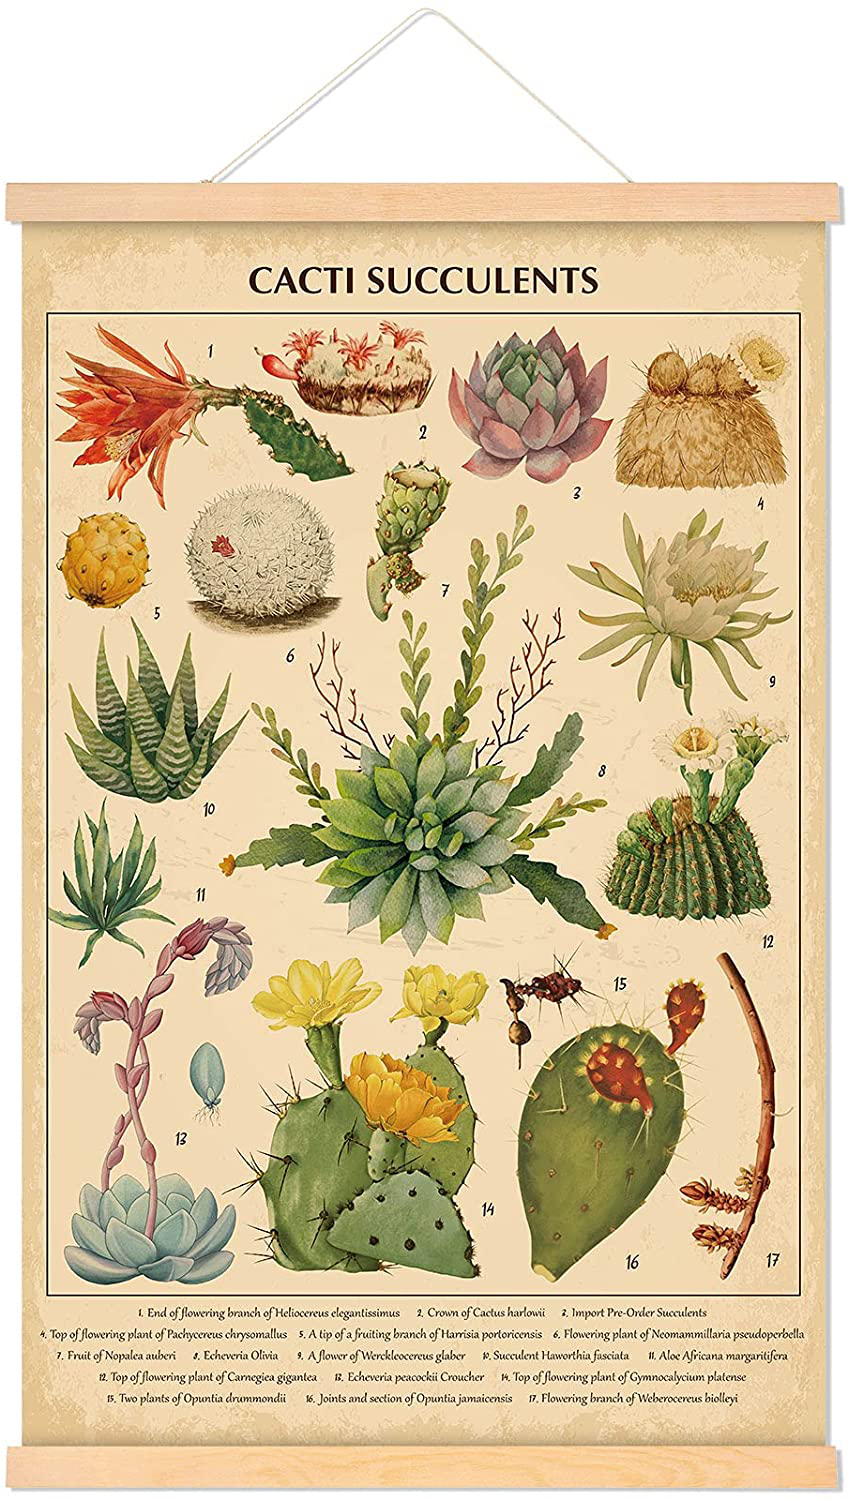 Vintage Cacti Succulents Poster Cactus Wall Art Prints Rustic Cactus Hanging Wall Decor Hanging Canvas Frame Wall Poster for Living Room Office Classroom Bedroom Dining Room Decor, 15.7 x 23.6 Inch